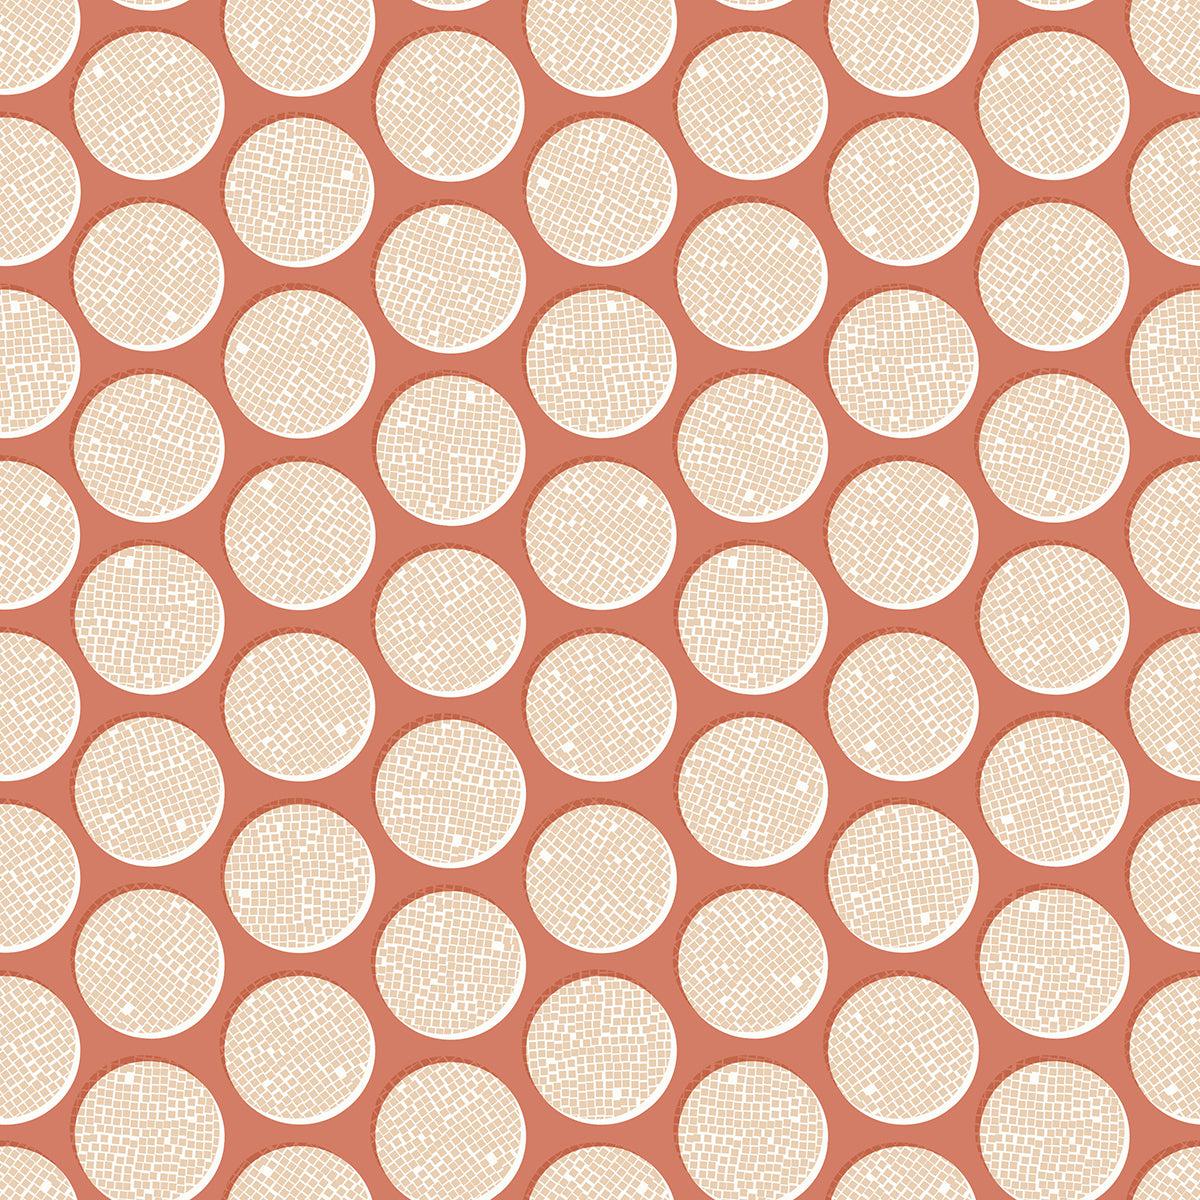 Ruby Star Society-Eclipse Terra Cotta-fabric-gather here online